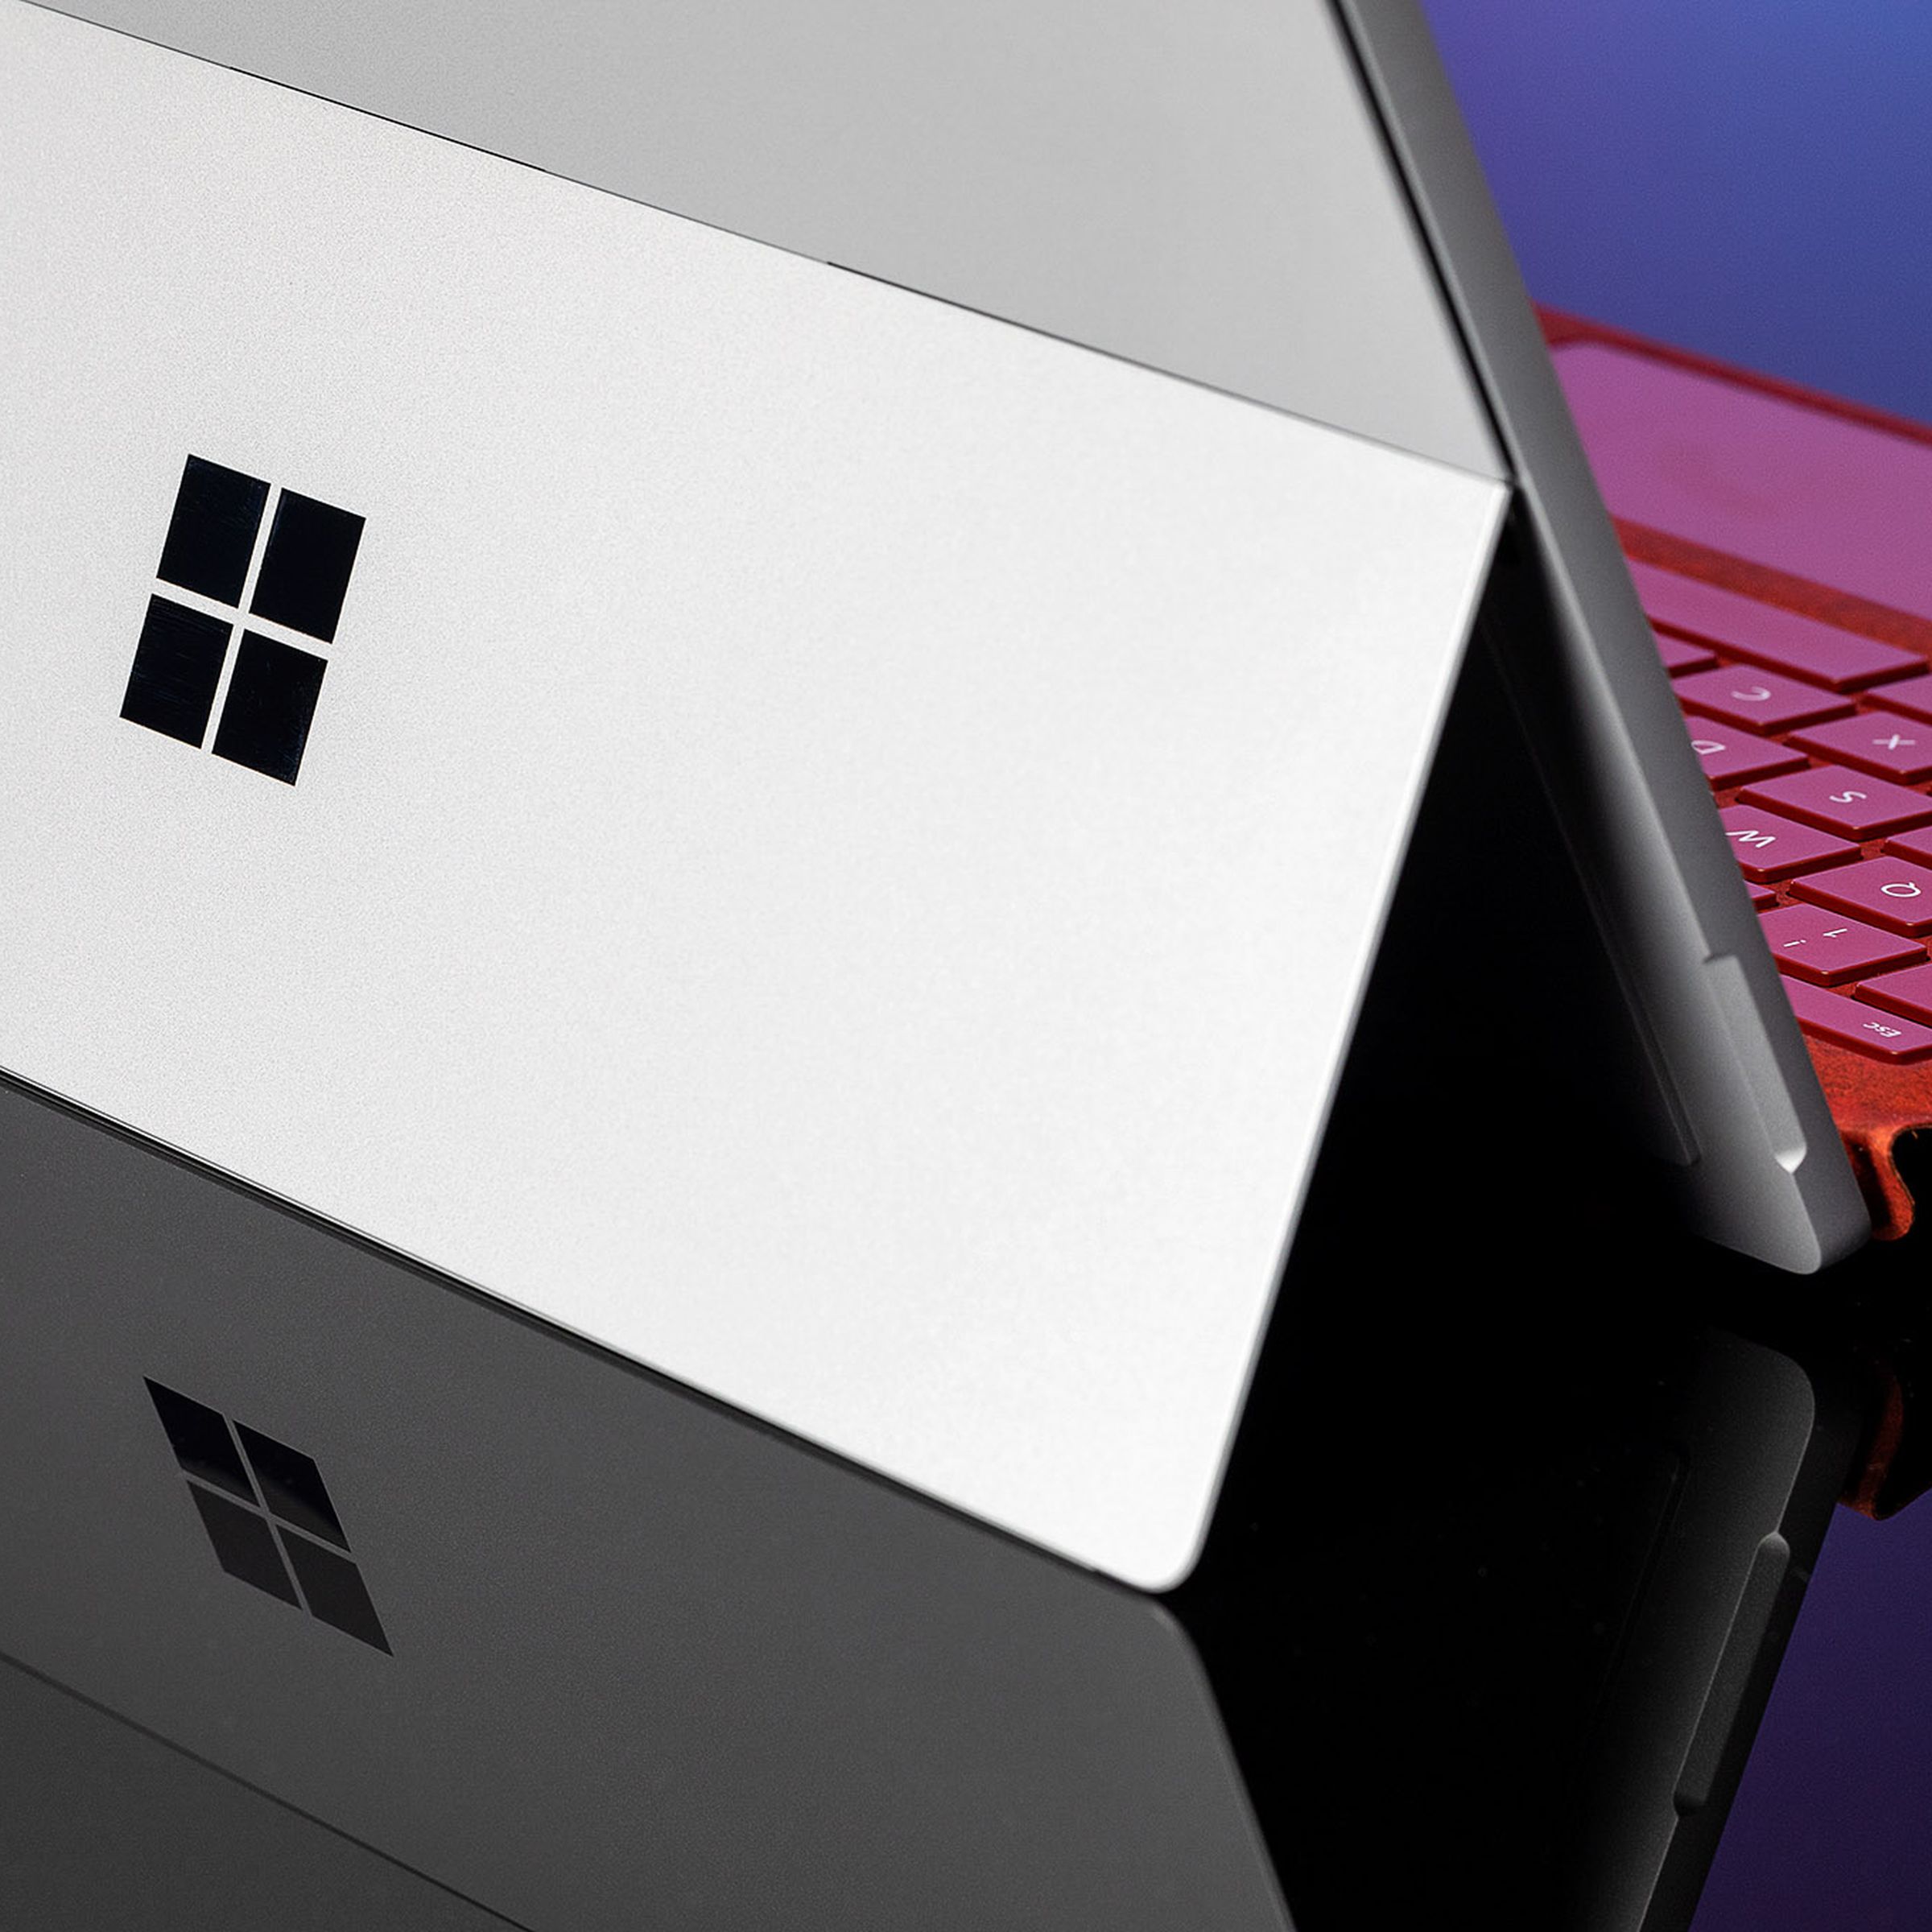 The Surface Pro design has remained mostly the same since 2014.